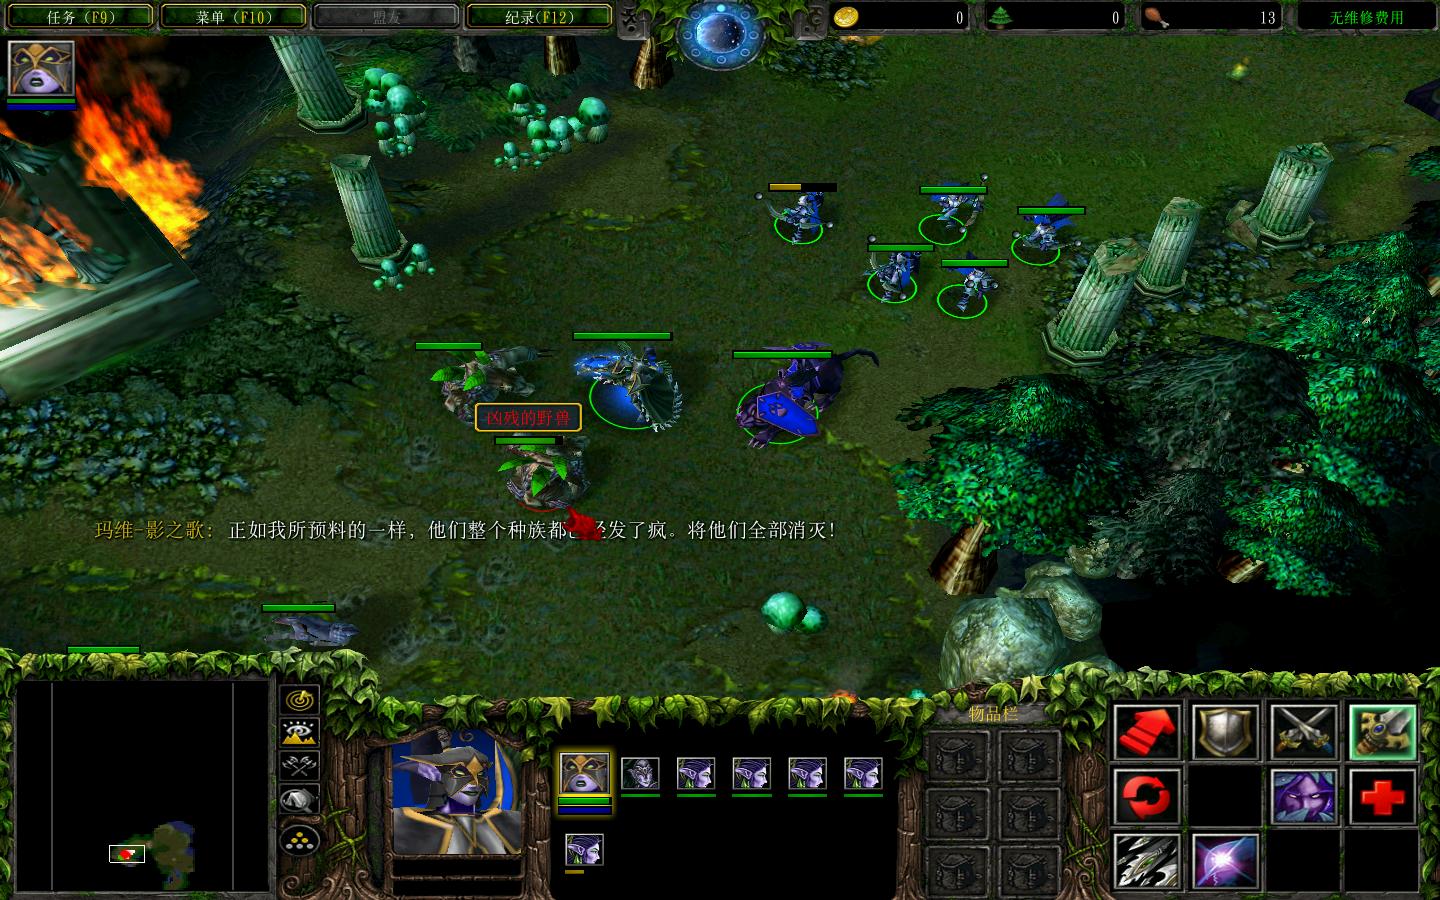 ħ3Warcraft III The Frozen Thronev1.20-κ3C v3.35.56